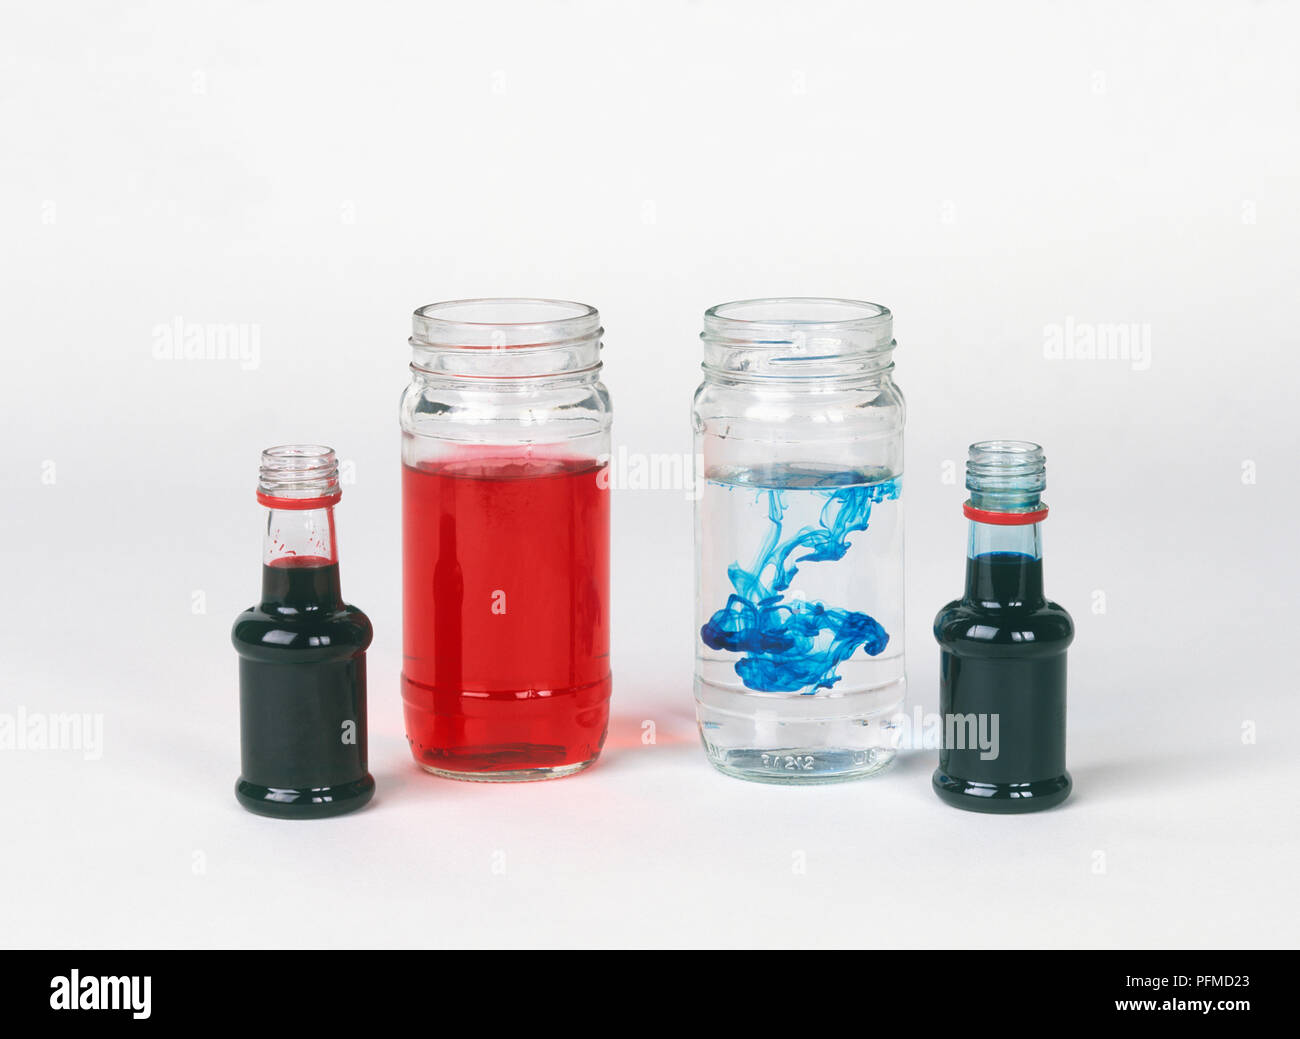 Jars and bottles containing food colouring Stock Photo